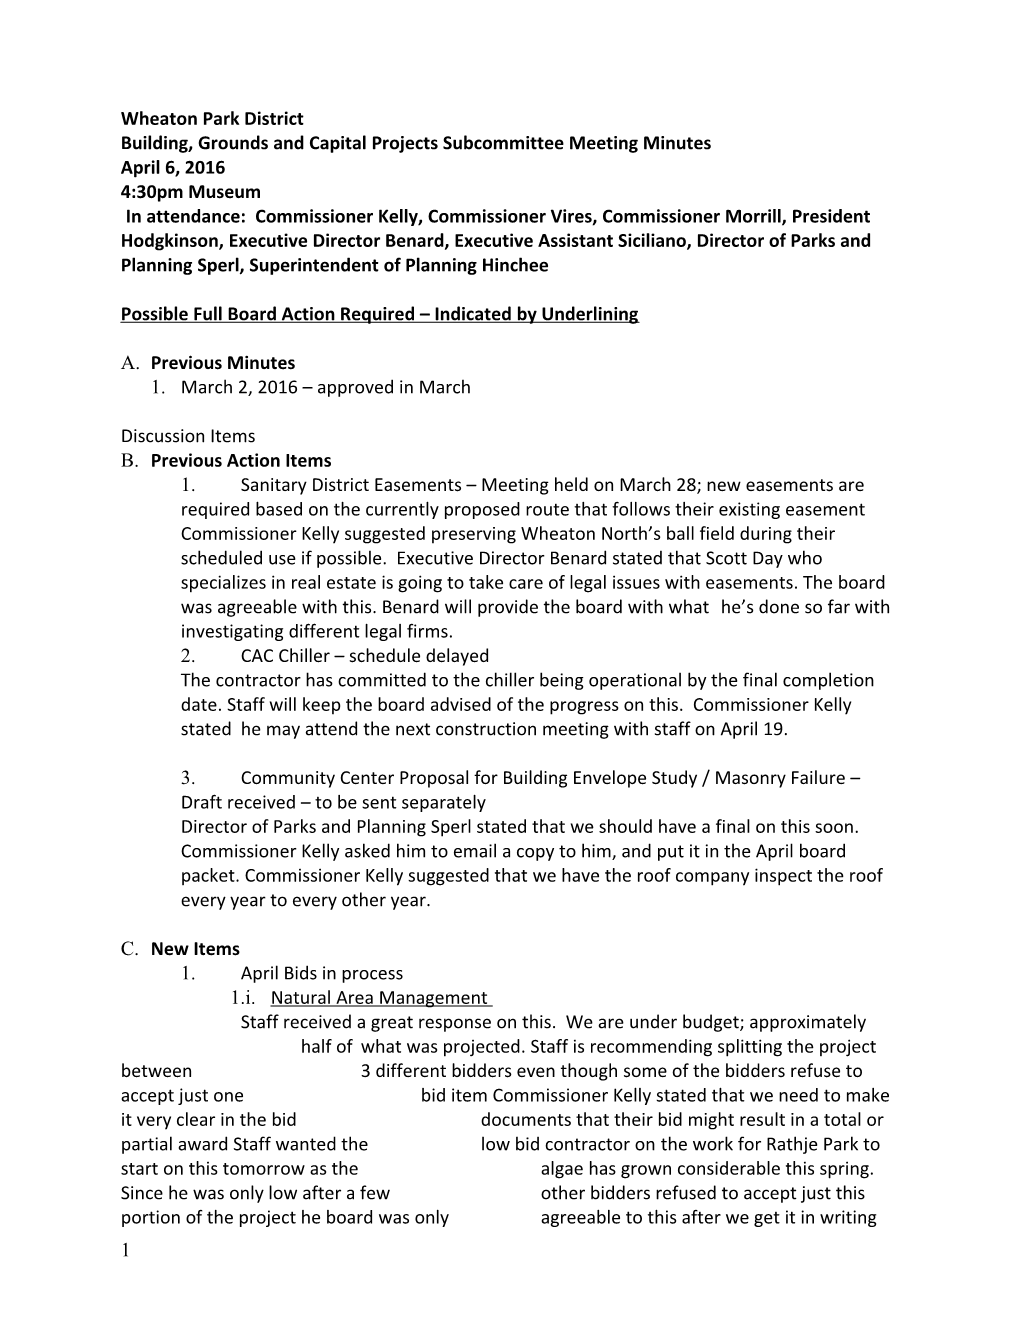 Building, Grounds and Capital Projects Subcommittee Meeting Minutes